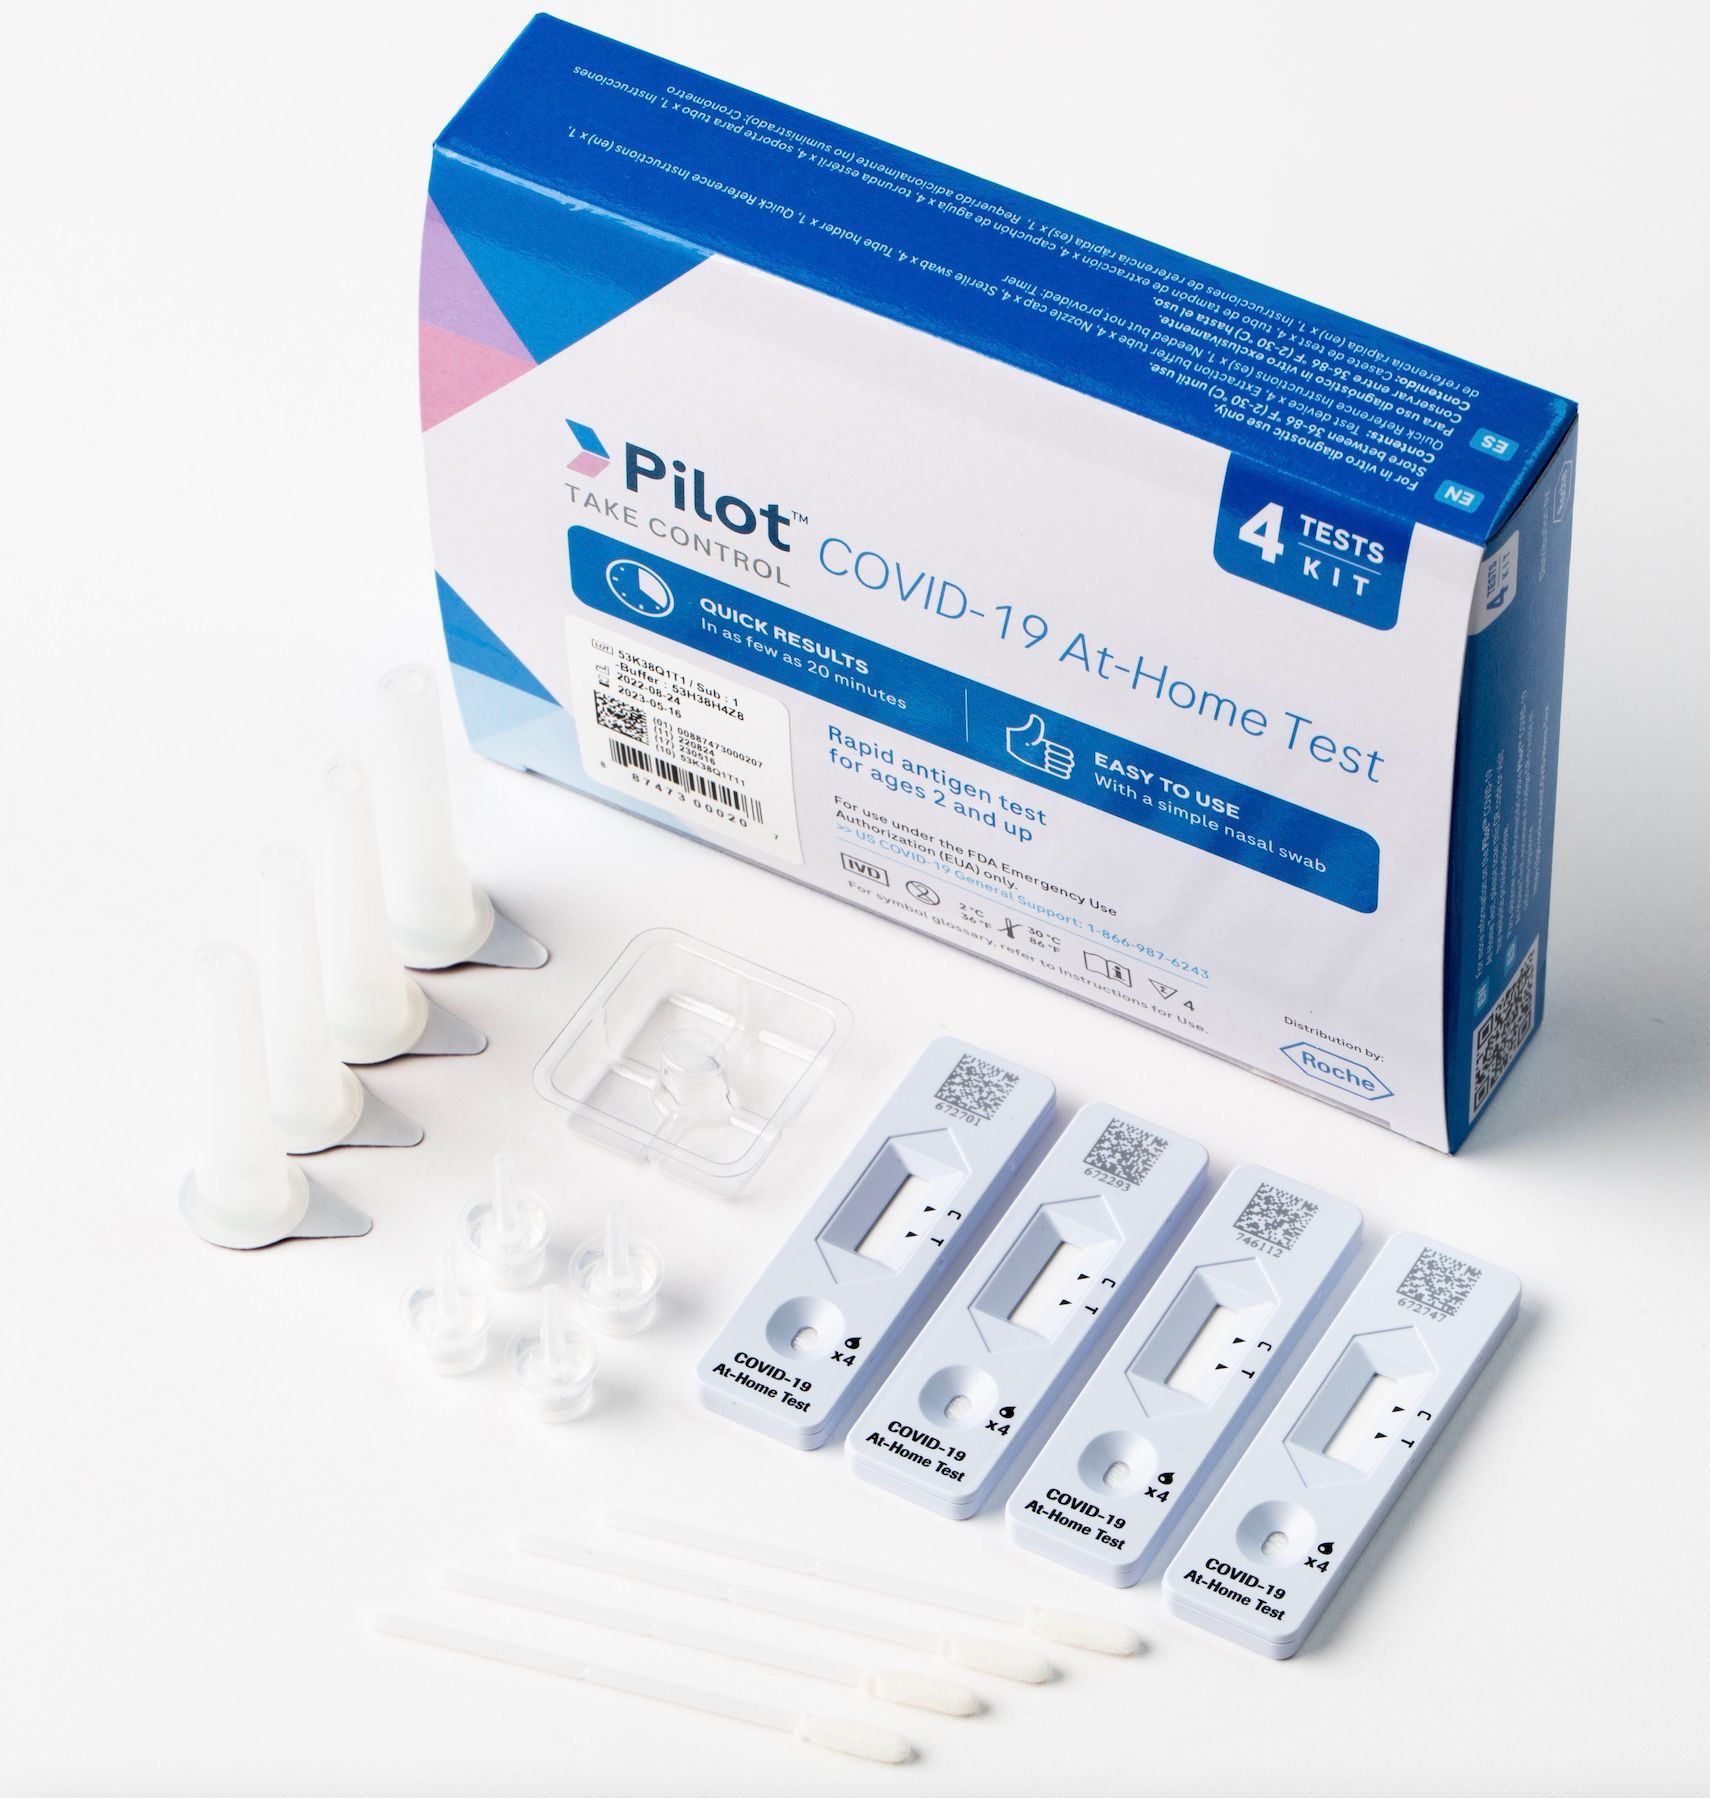 DISCLimited Inventory: Pilot COVID-19 At-Home Test distributed by Roche, 4 tests